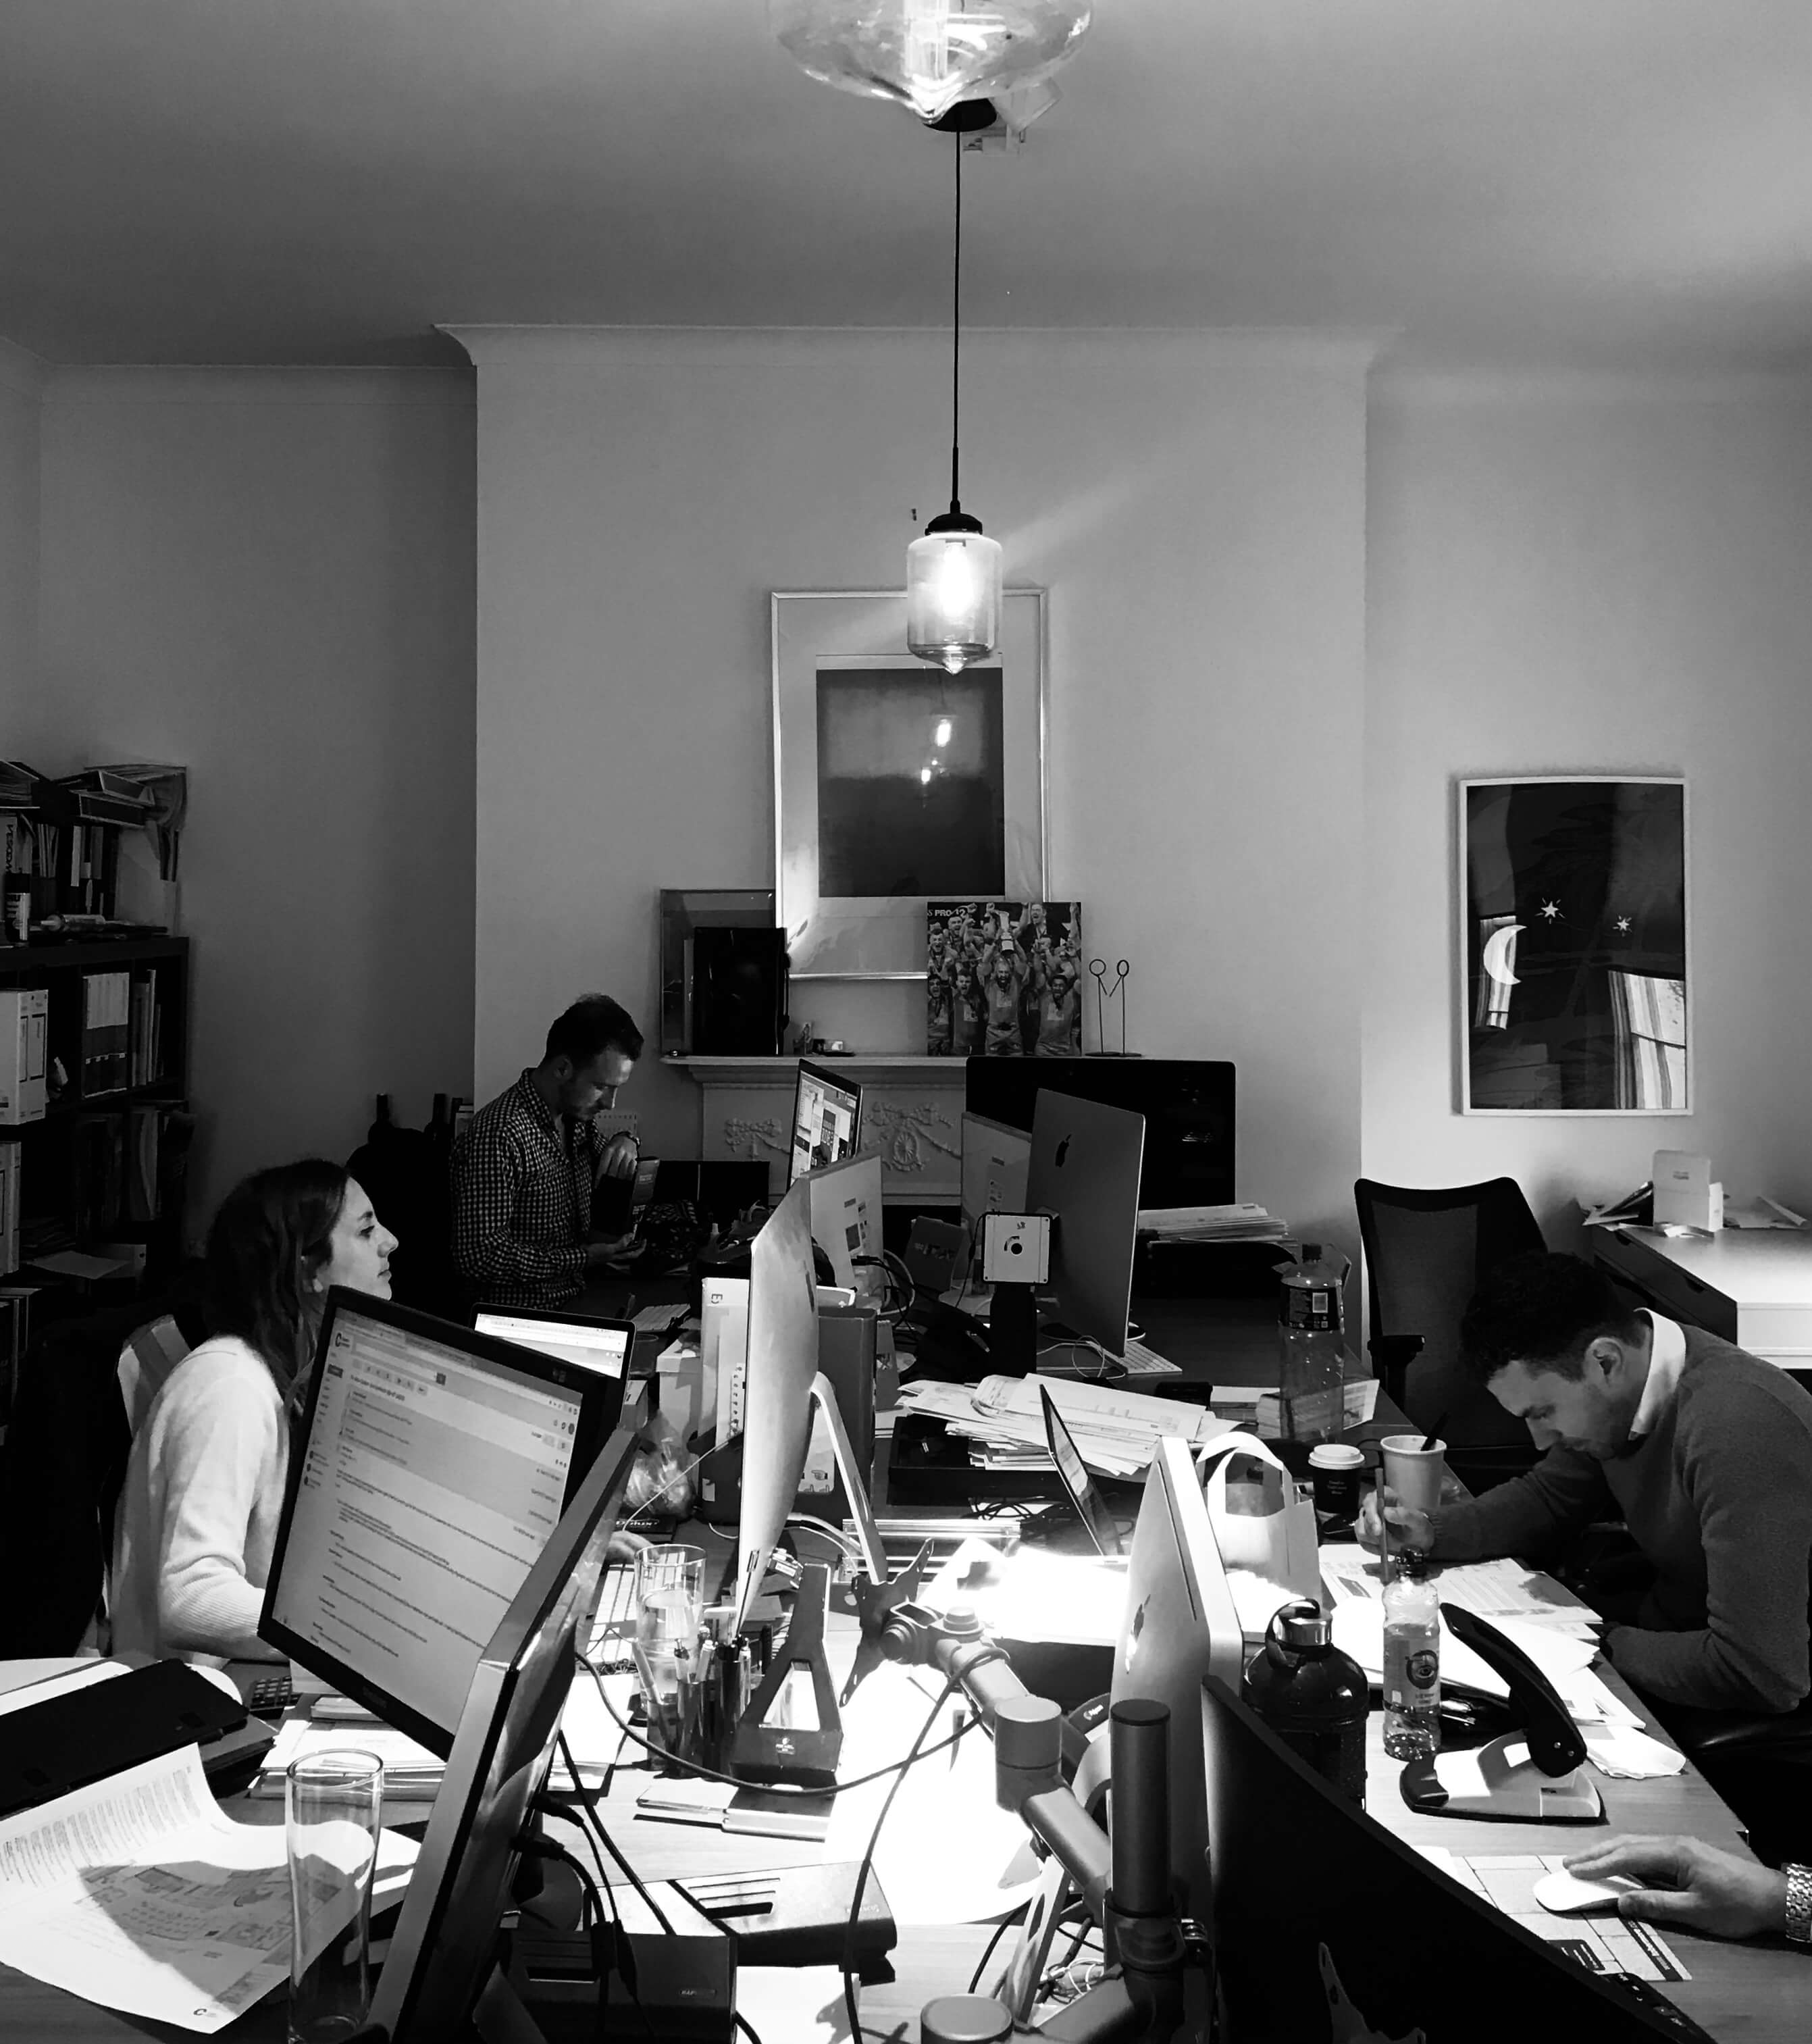 SLMD office interior with people working